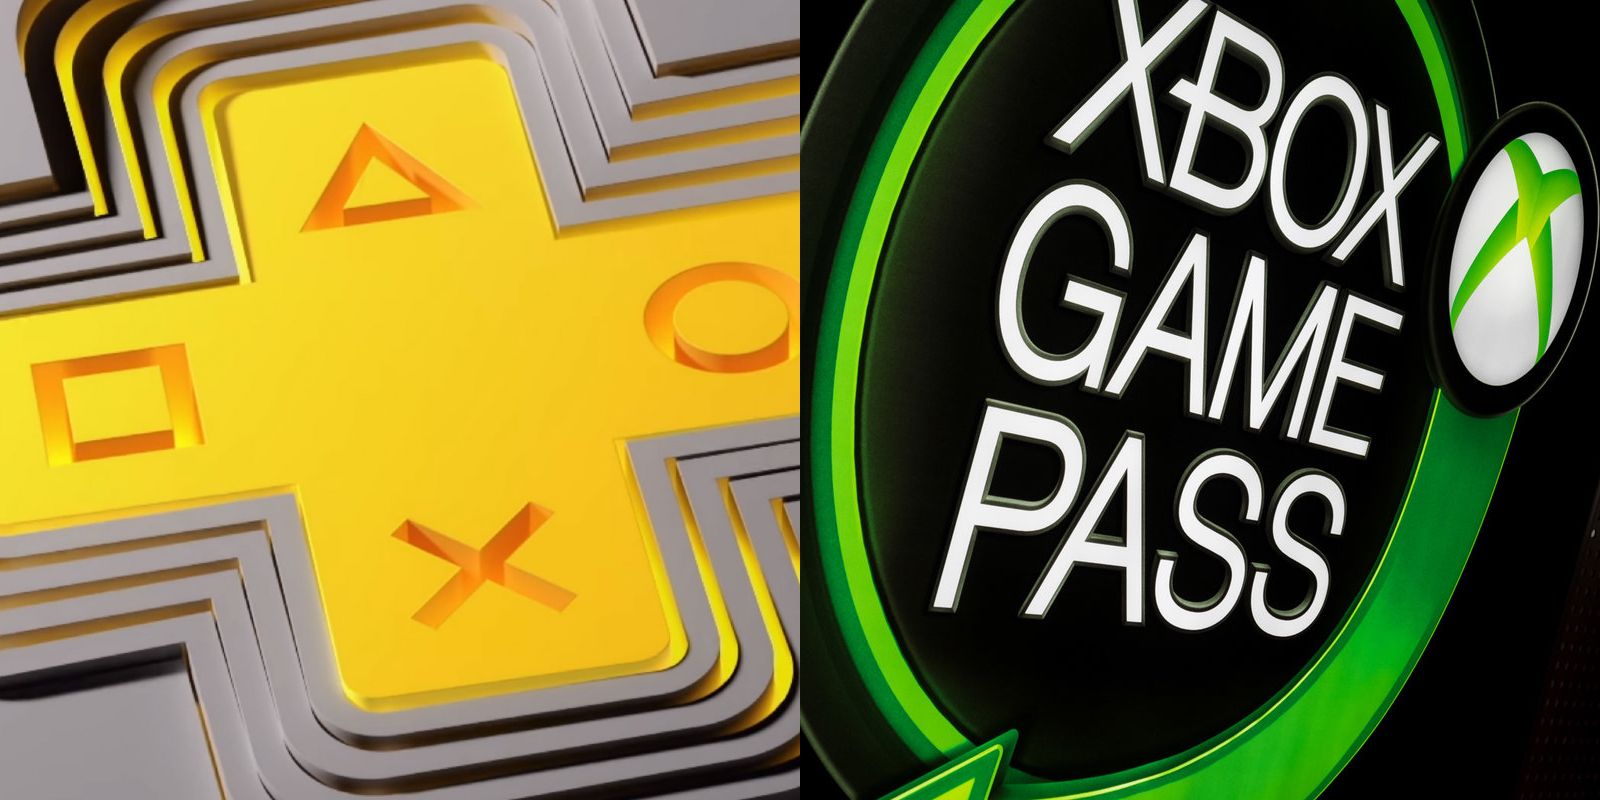 Game Pass is still a better deal than PlayStation, if only for its first-party day one releases